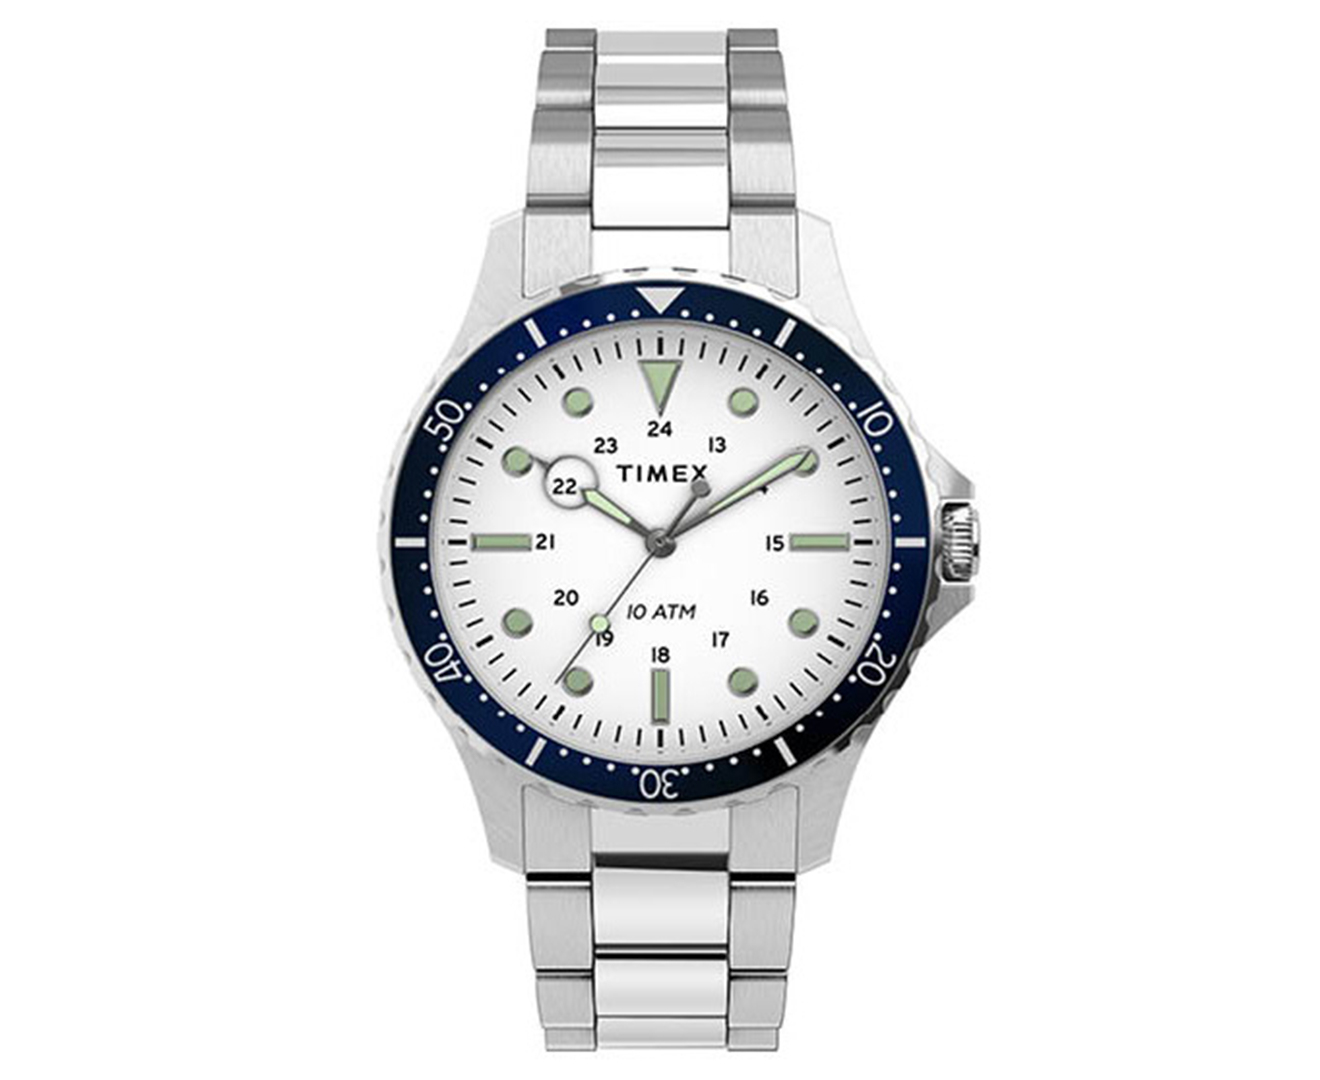 Buy discount Timex watches for men and women online! 